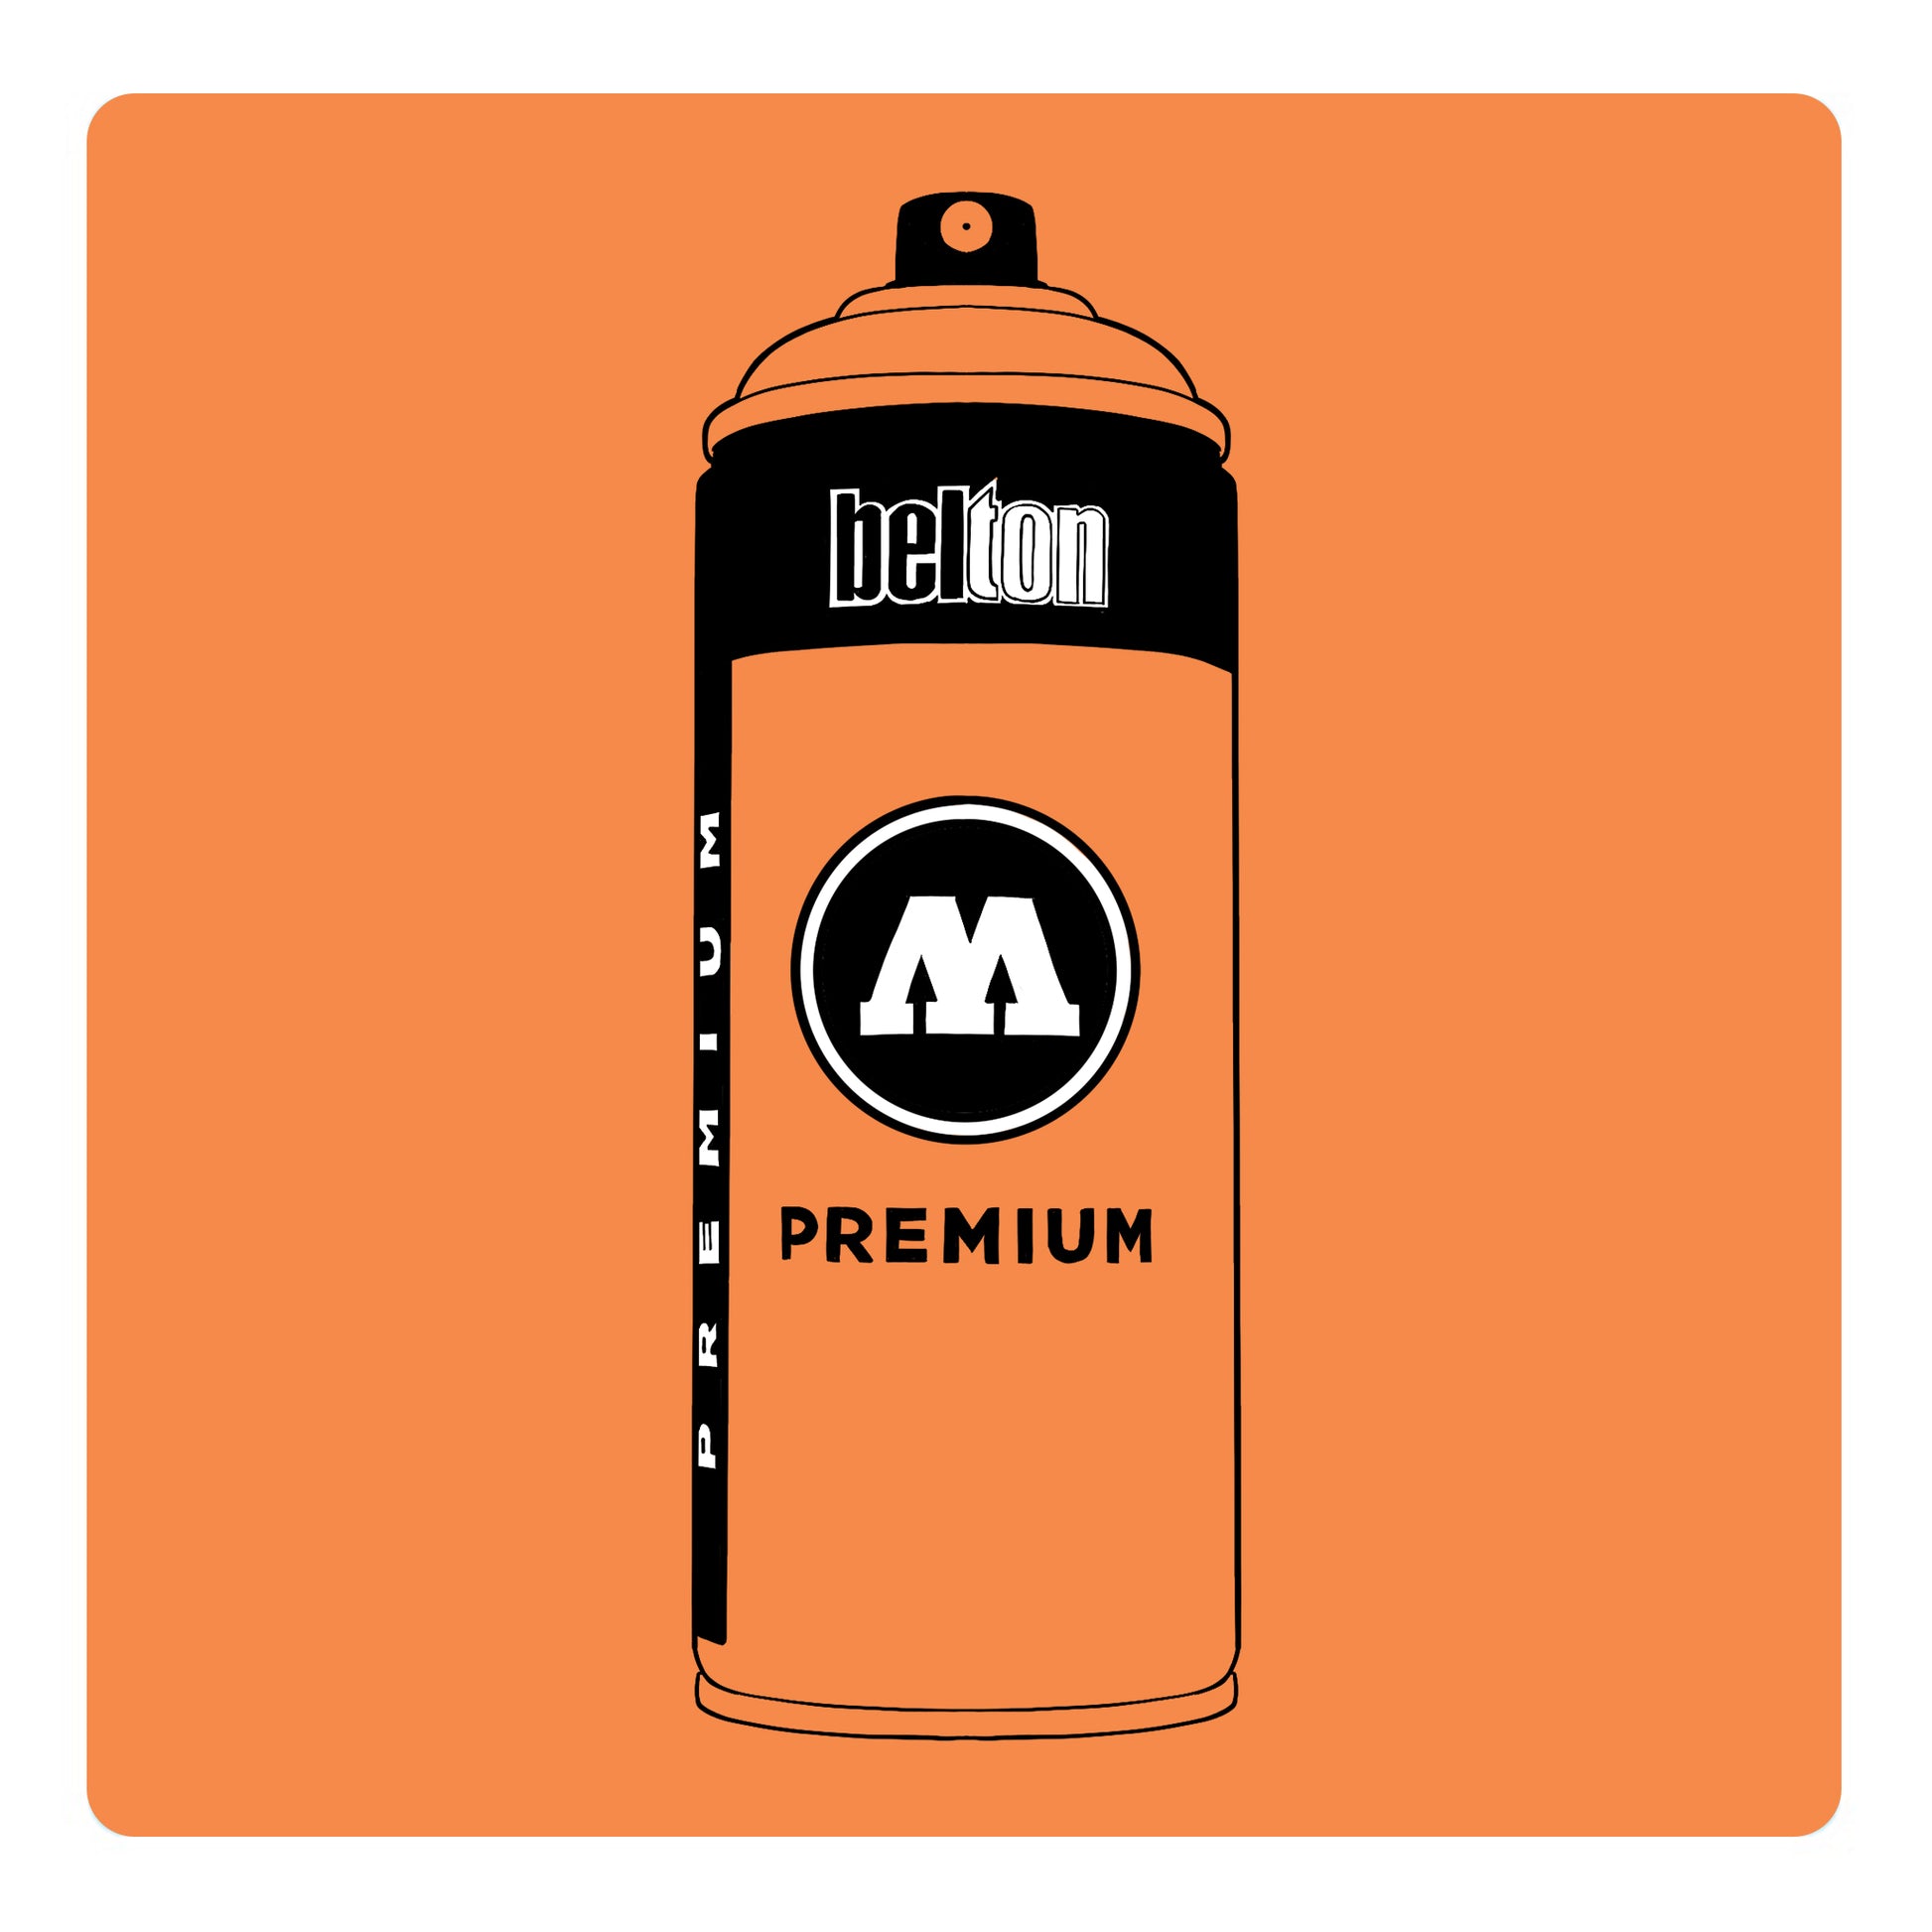 A black outline drawing of a orange cream spray paint can with the words "belton","premium" and the letter"M" written on the face in black and white font. The background is a color swatch of the same orange cream with a white border.